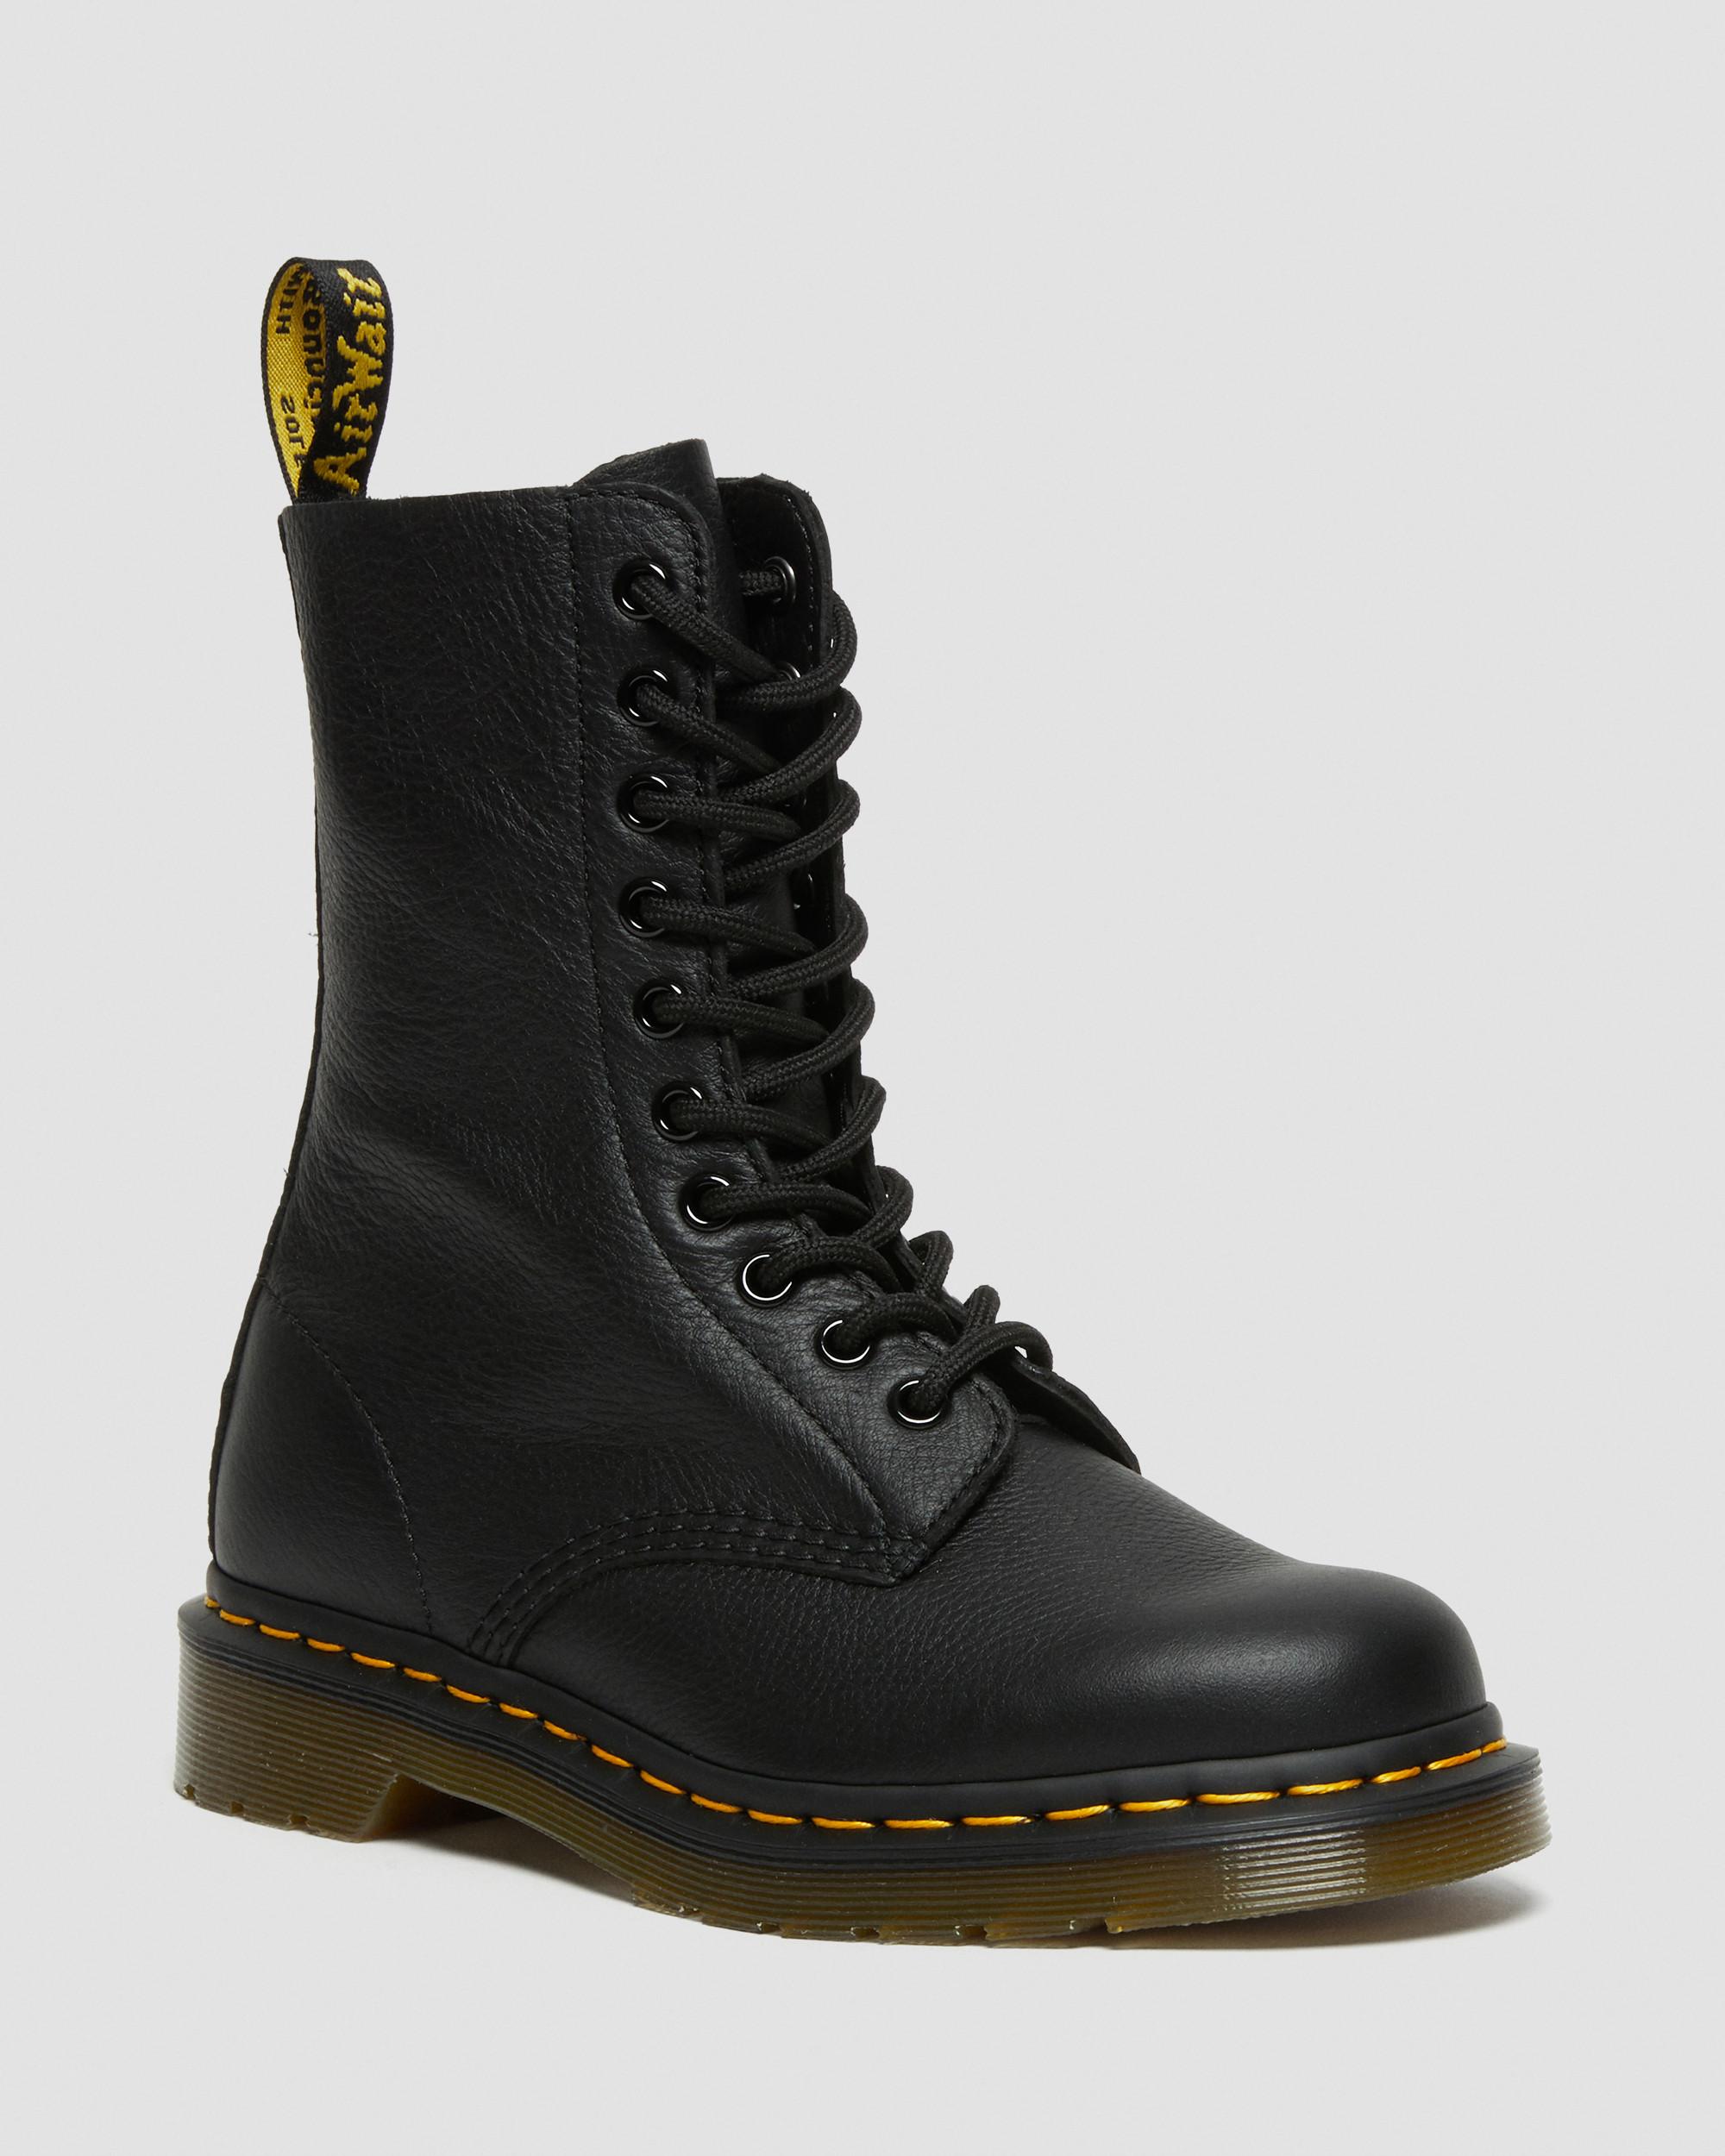 1490 Virginia Leather Mid Calf Boots1490 Virginia Leather Mid Calf Boots Dr. Martens